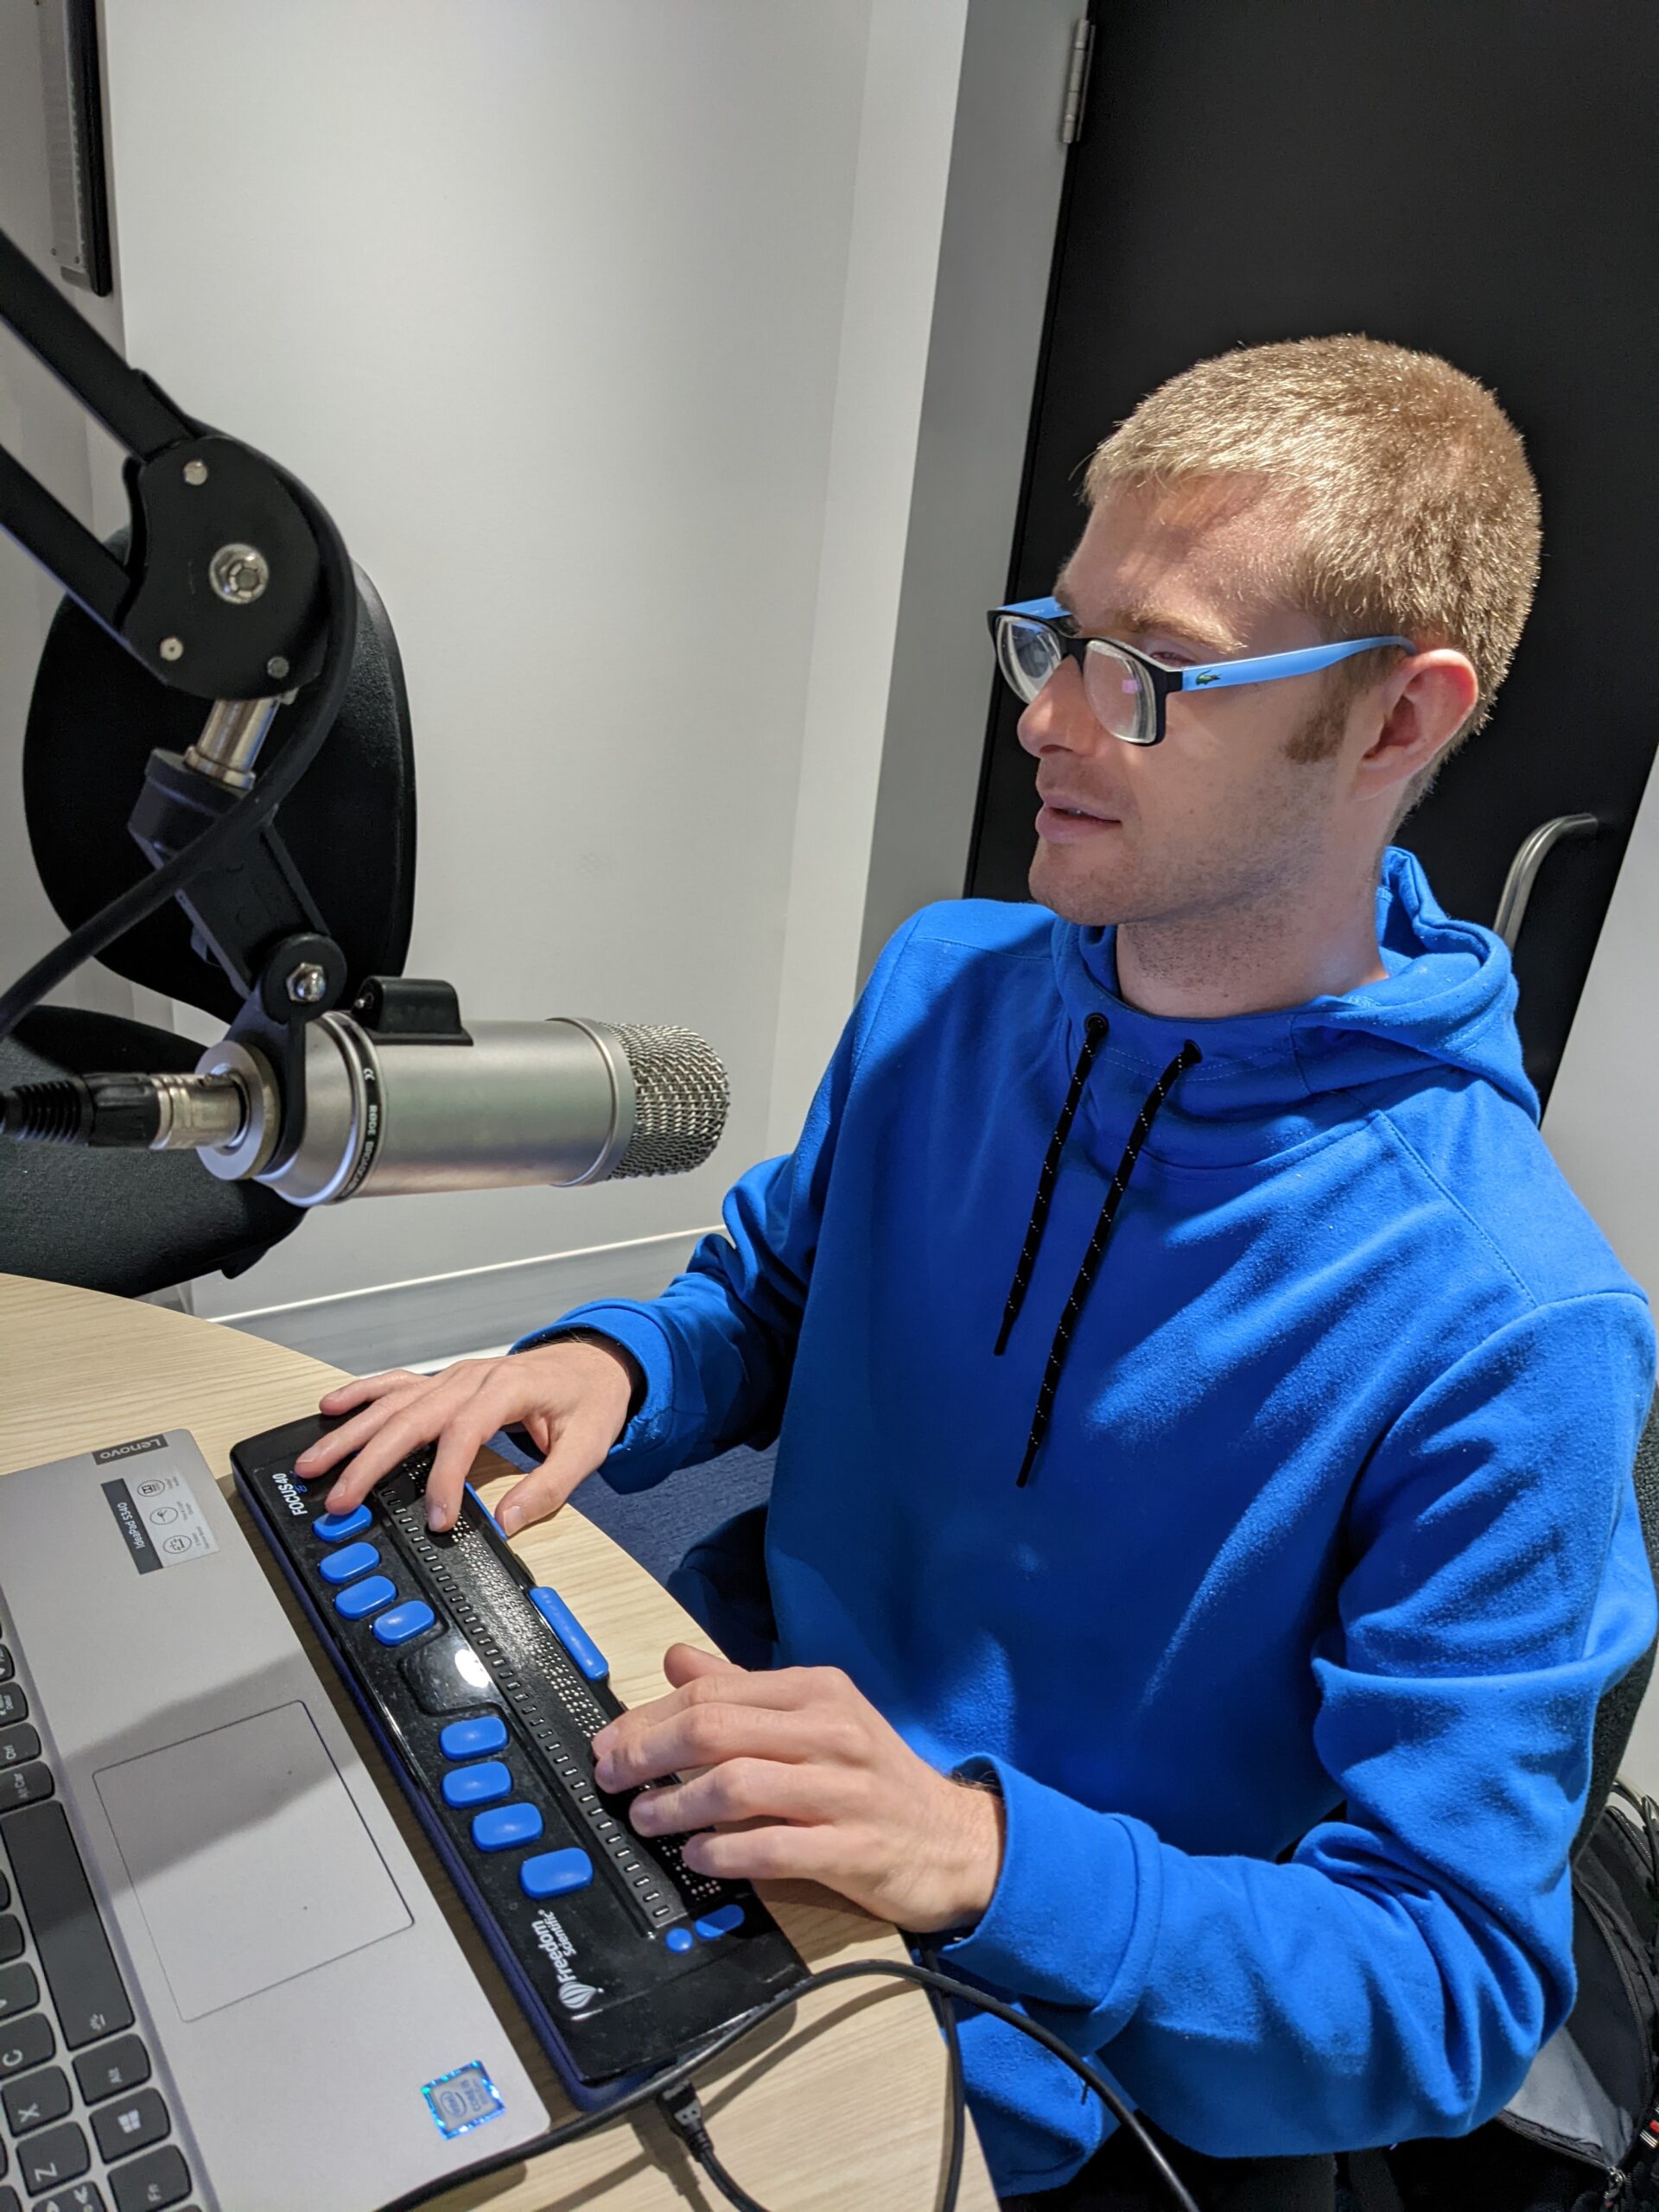 In this image, Benjamin is sitting and working. He is wearing a blue sweatshirt and glasses with a blue frame. 